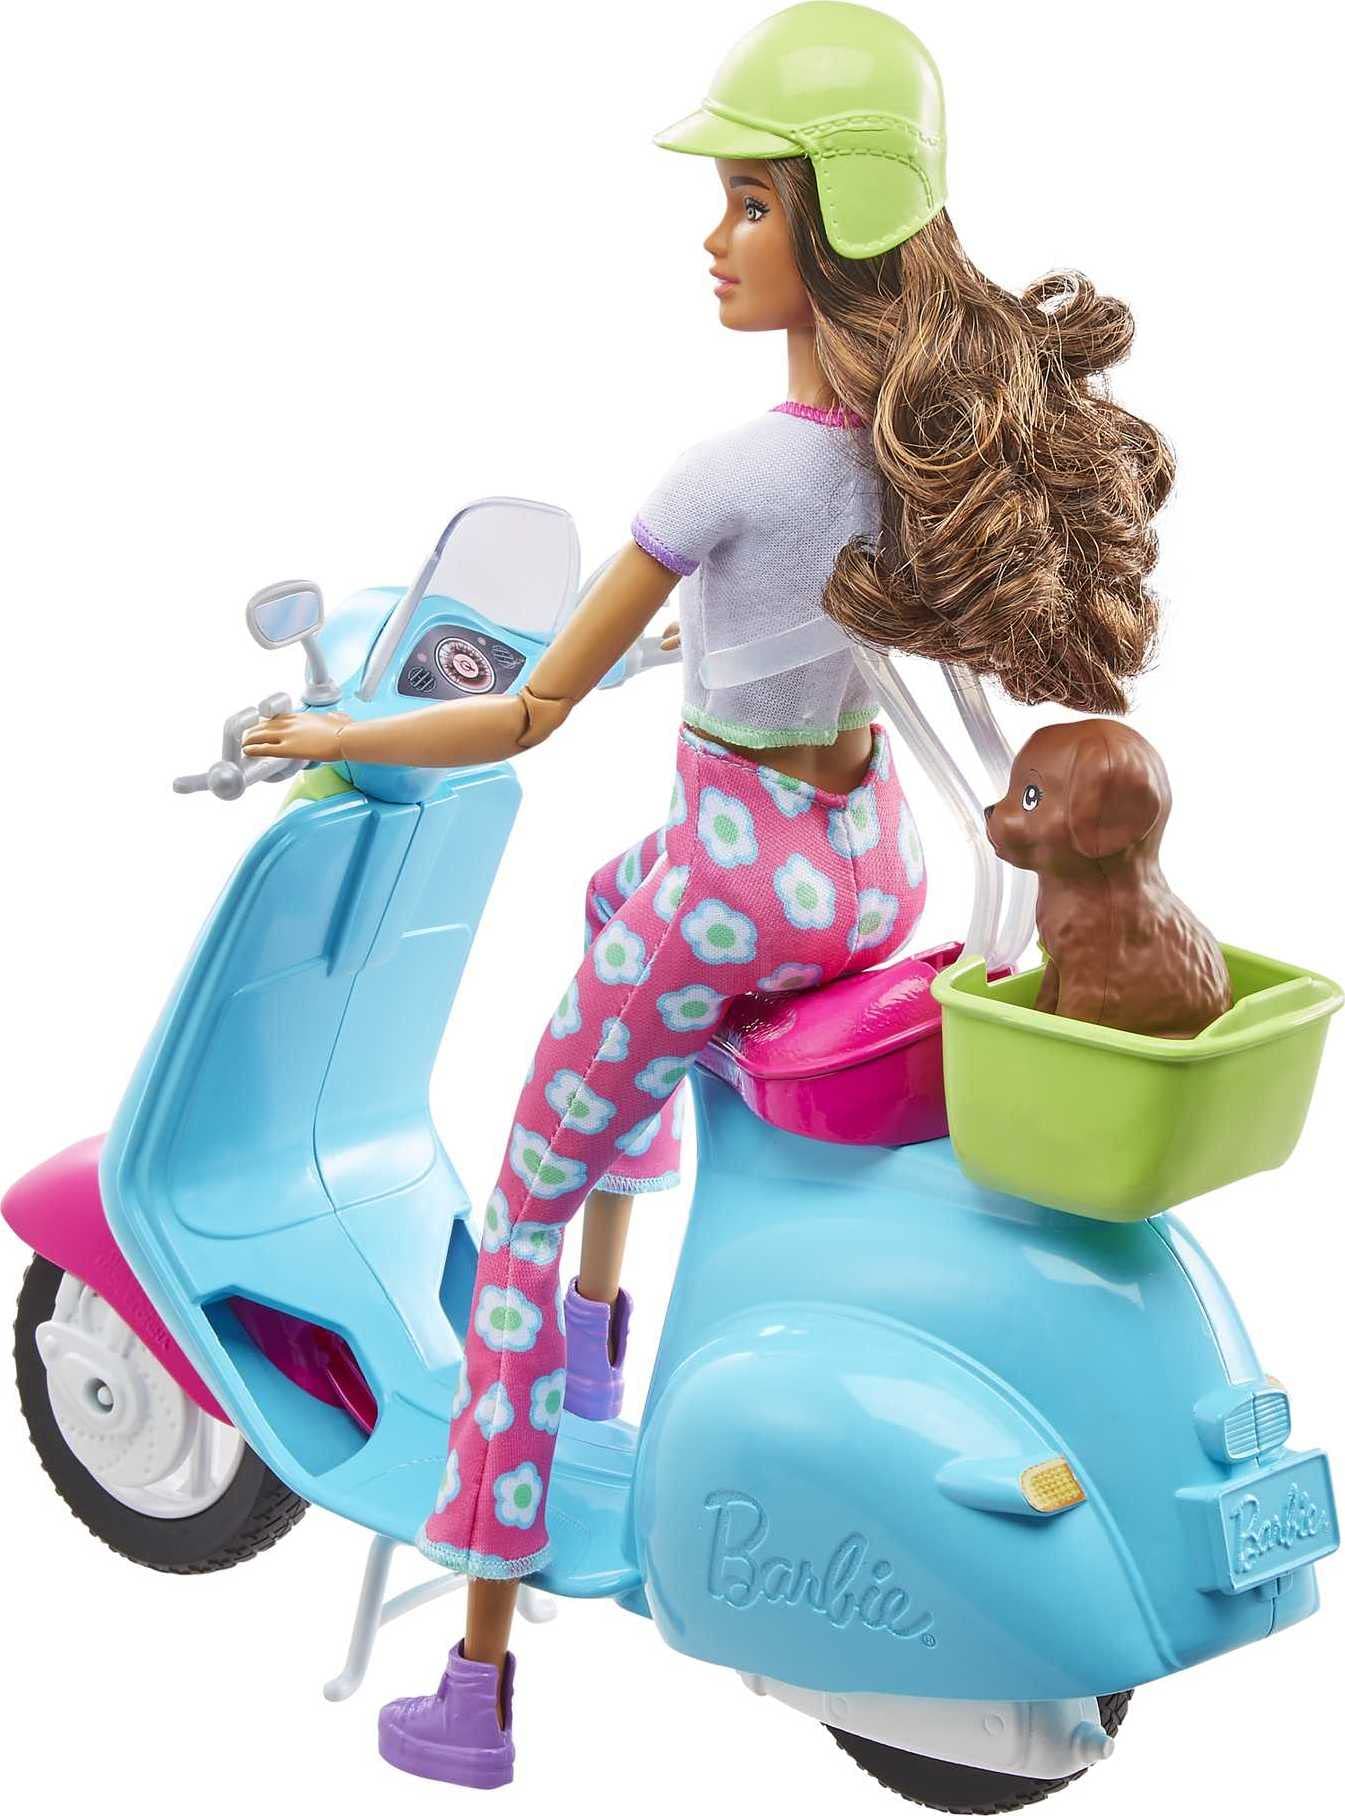 Barbie Fashionistas Doll and Scooter, Travel Playset with Stickers, Pet Puppy and Themed Accessories like Map and Camera (Amazon Exclusive)